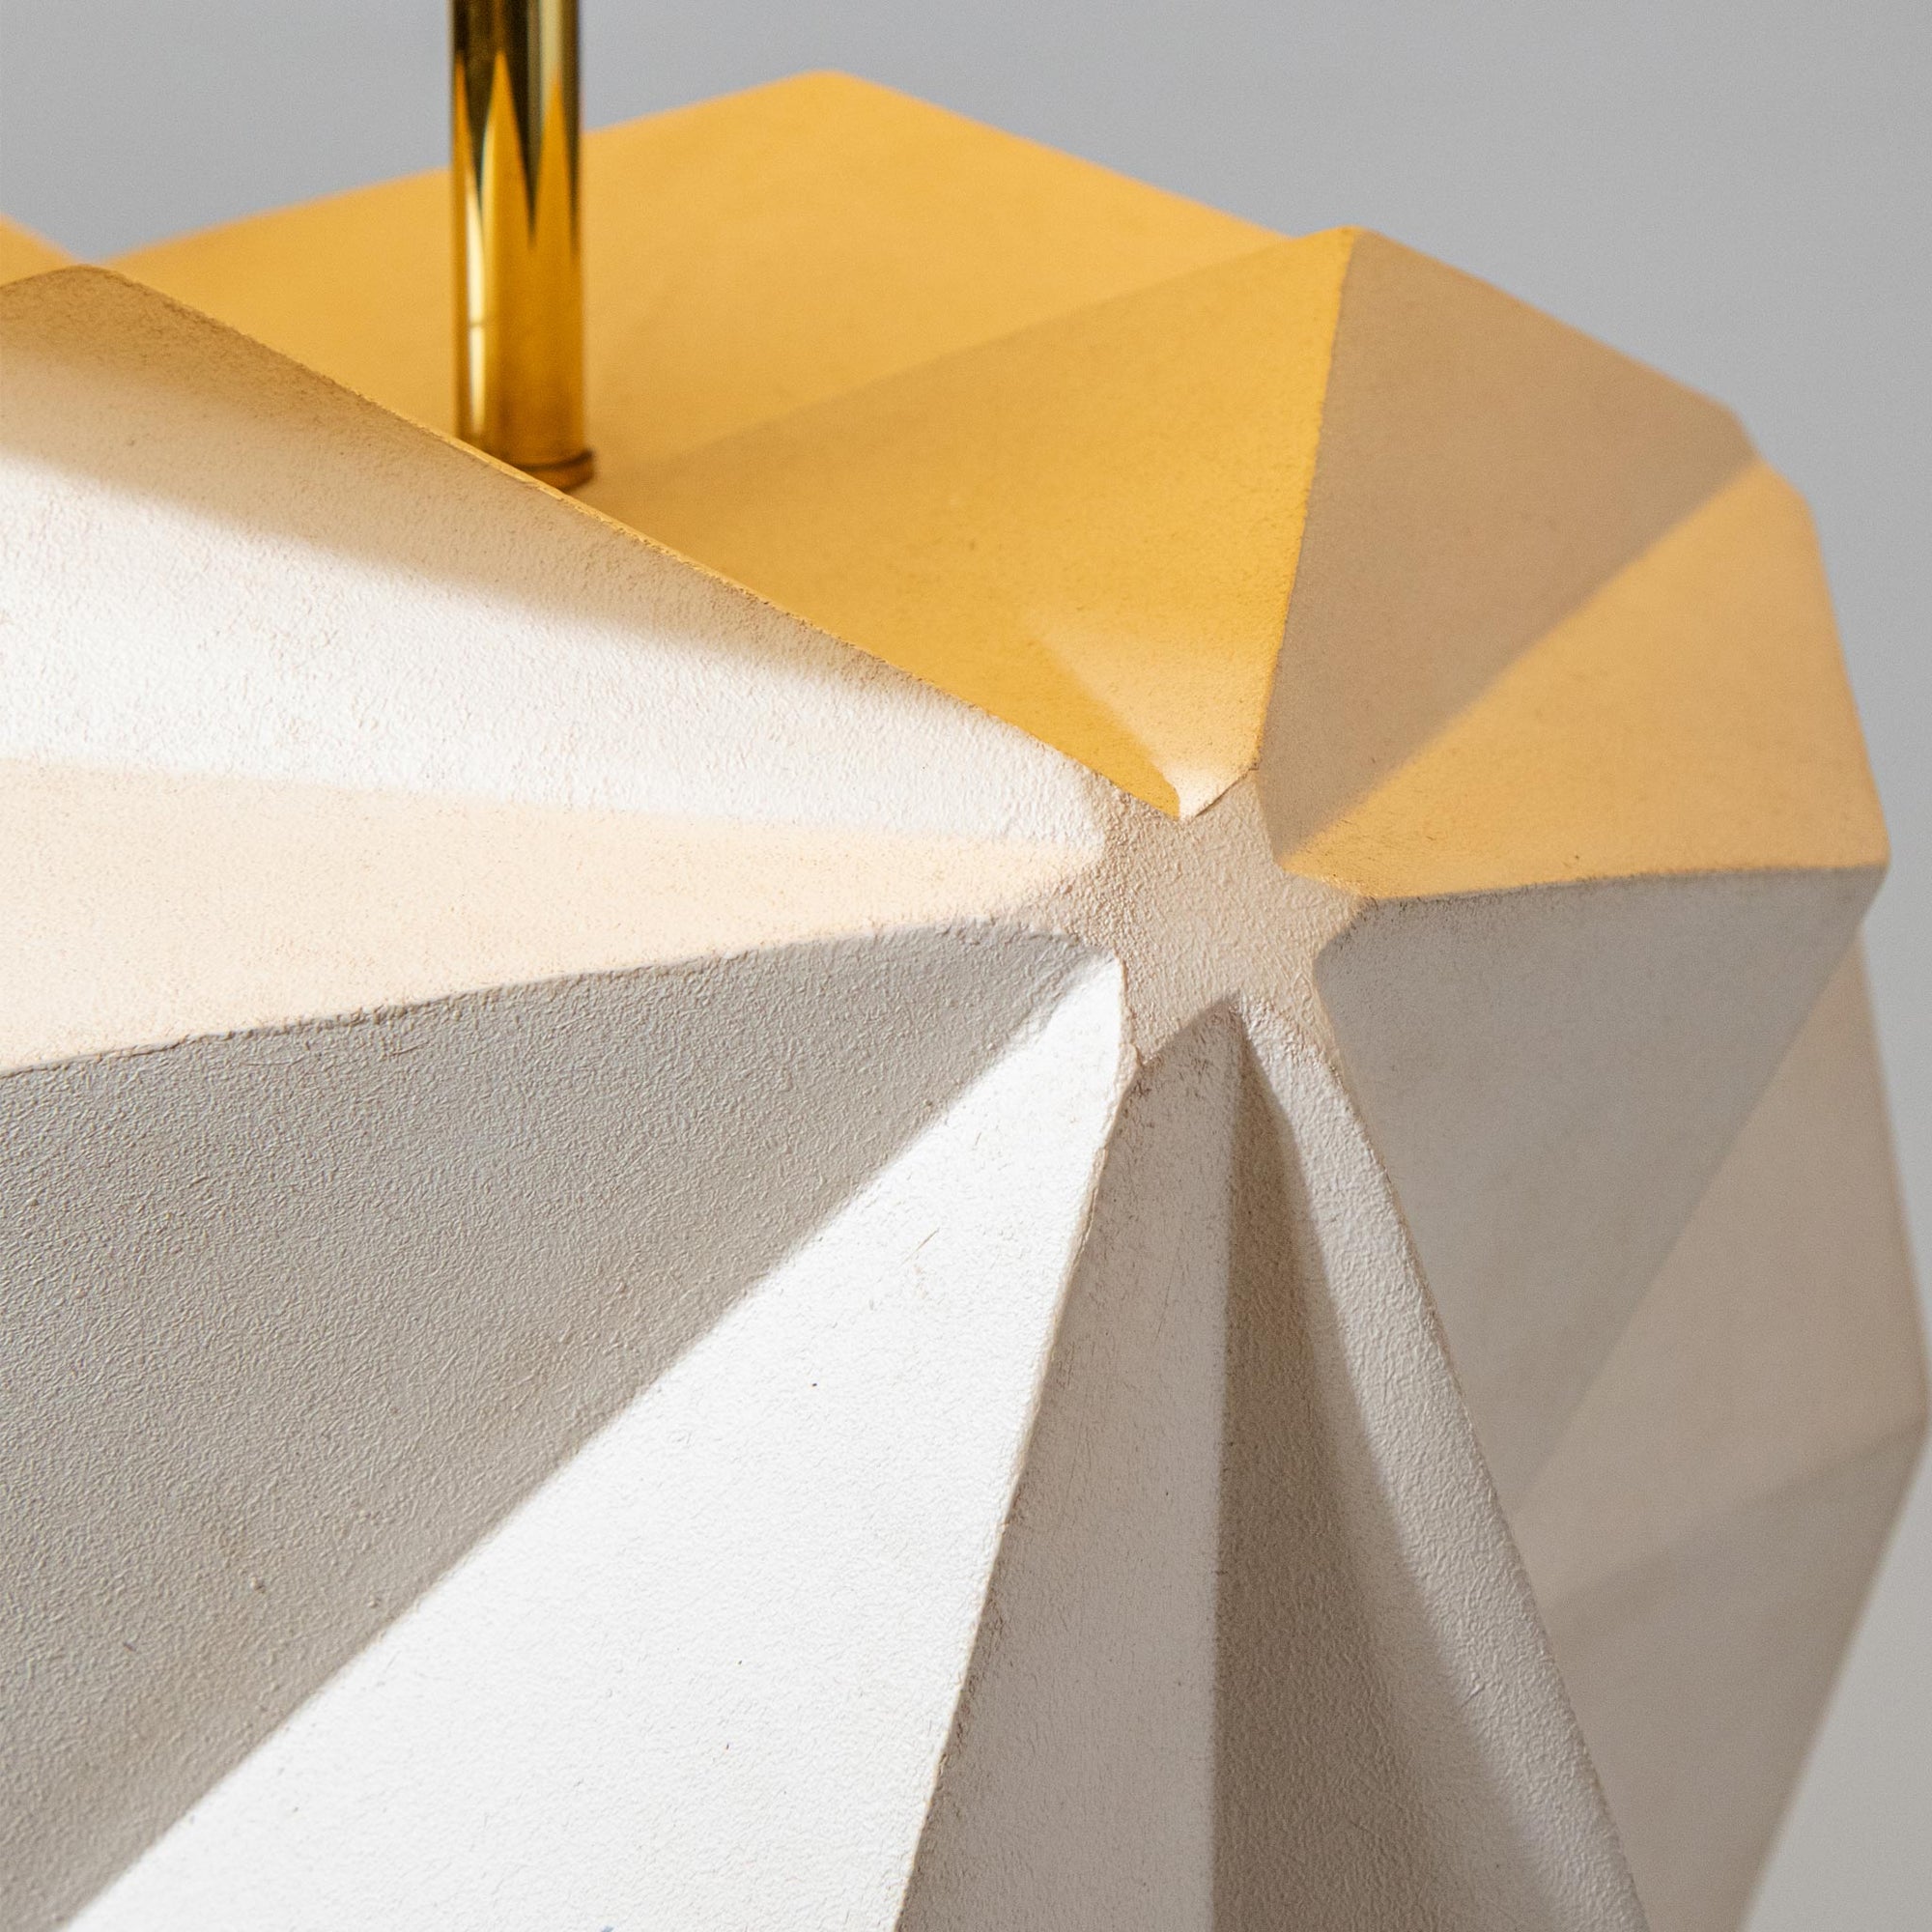 Eiger Table Lamp